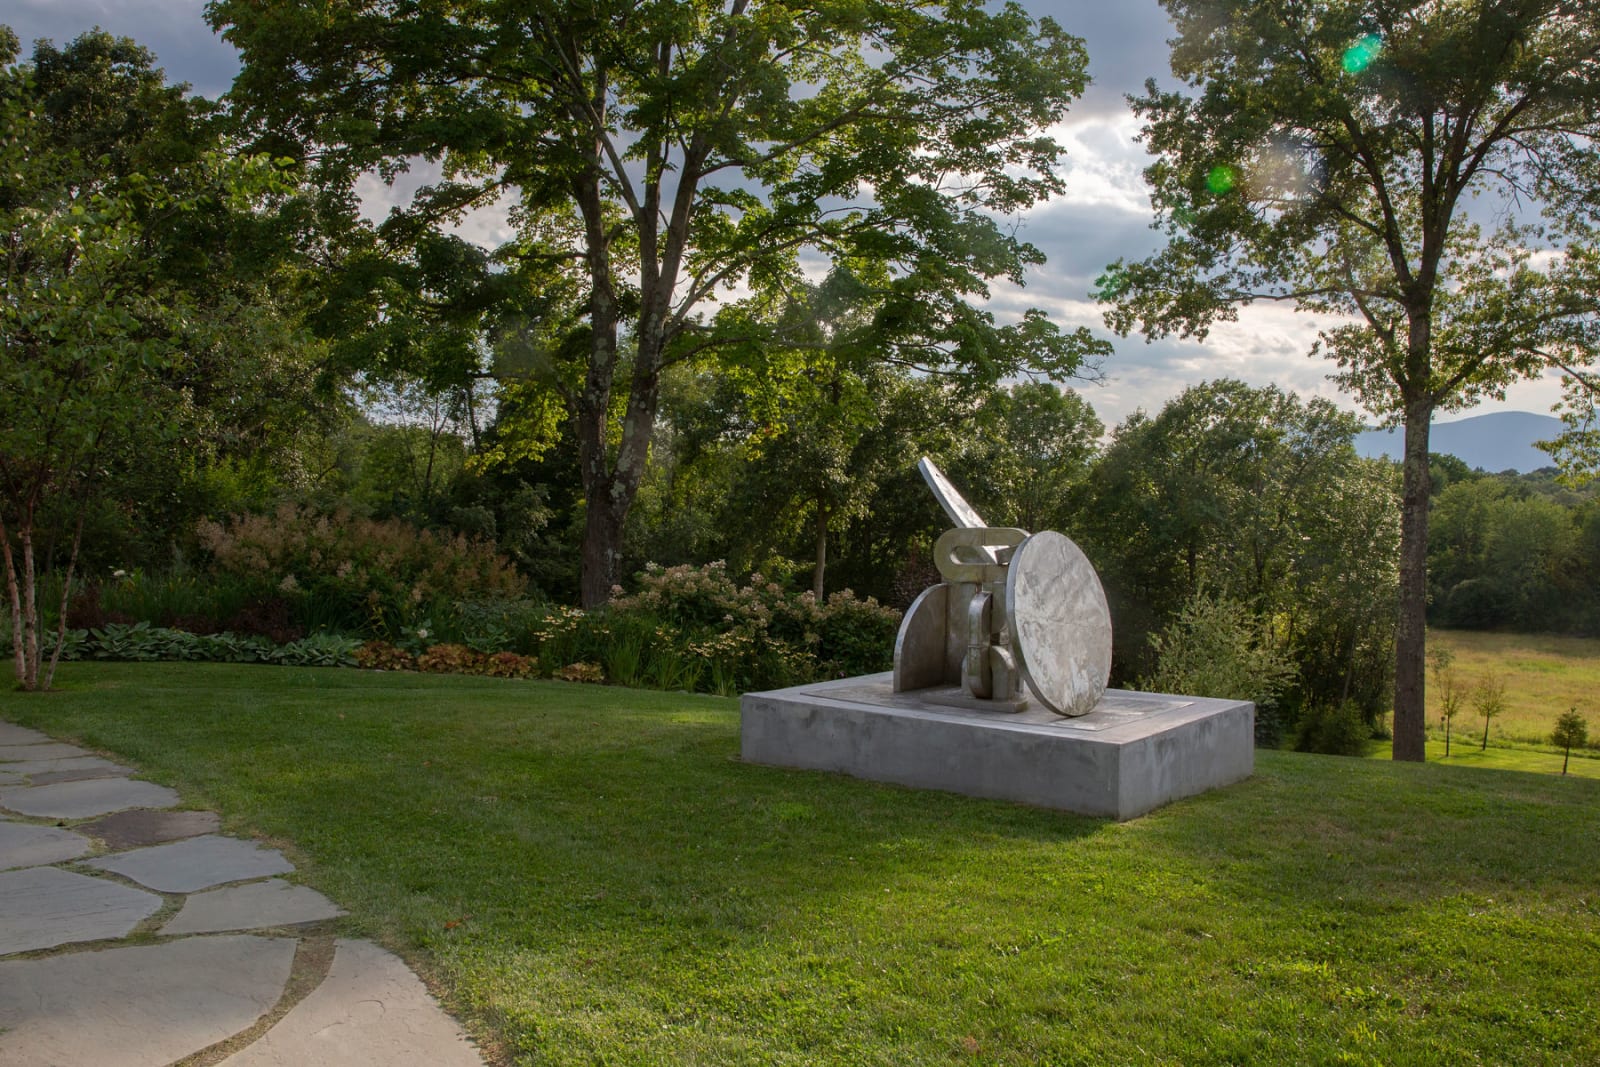 <div class="additional_caption">'Untitled', 1993. Stainless steel, 148.6 x 198 x 122cm(58 1/2 x 78 x 48 1/8in)</div>